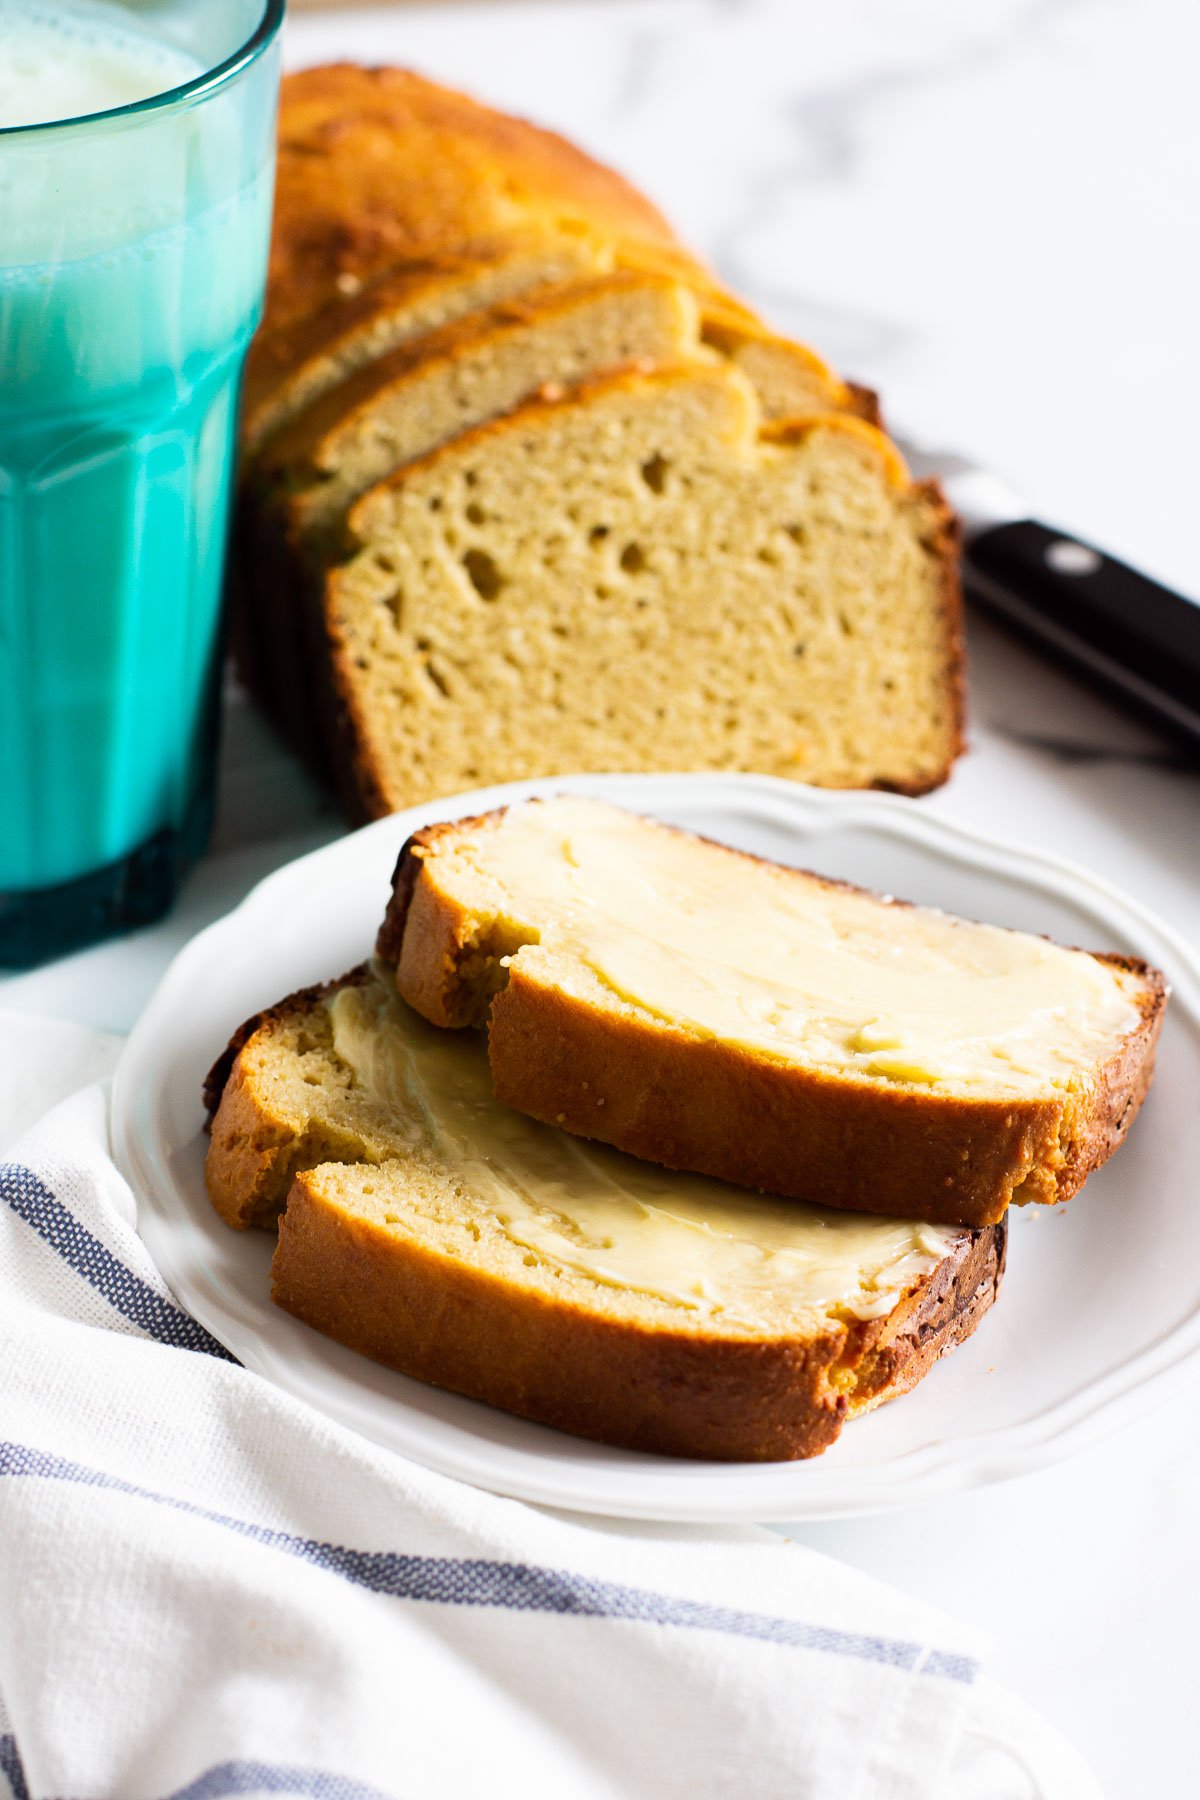 Sliced almond flour bread on plate with a glass of milk.